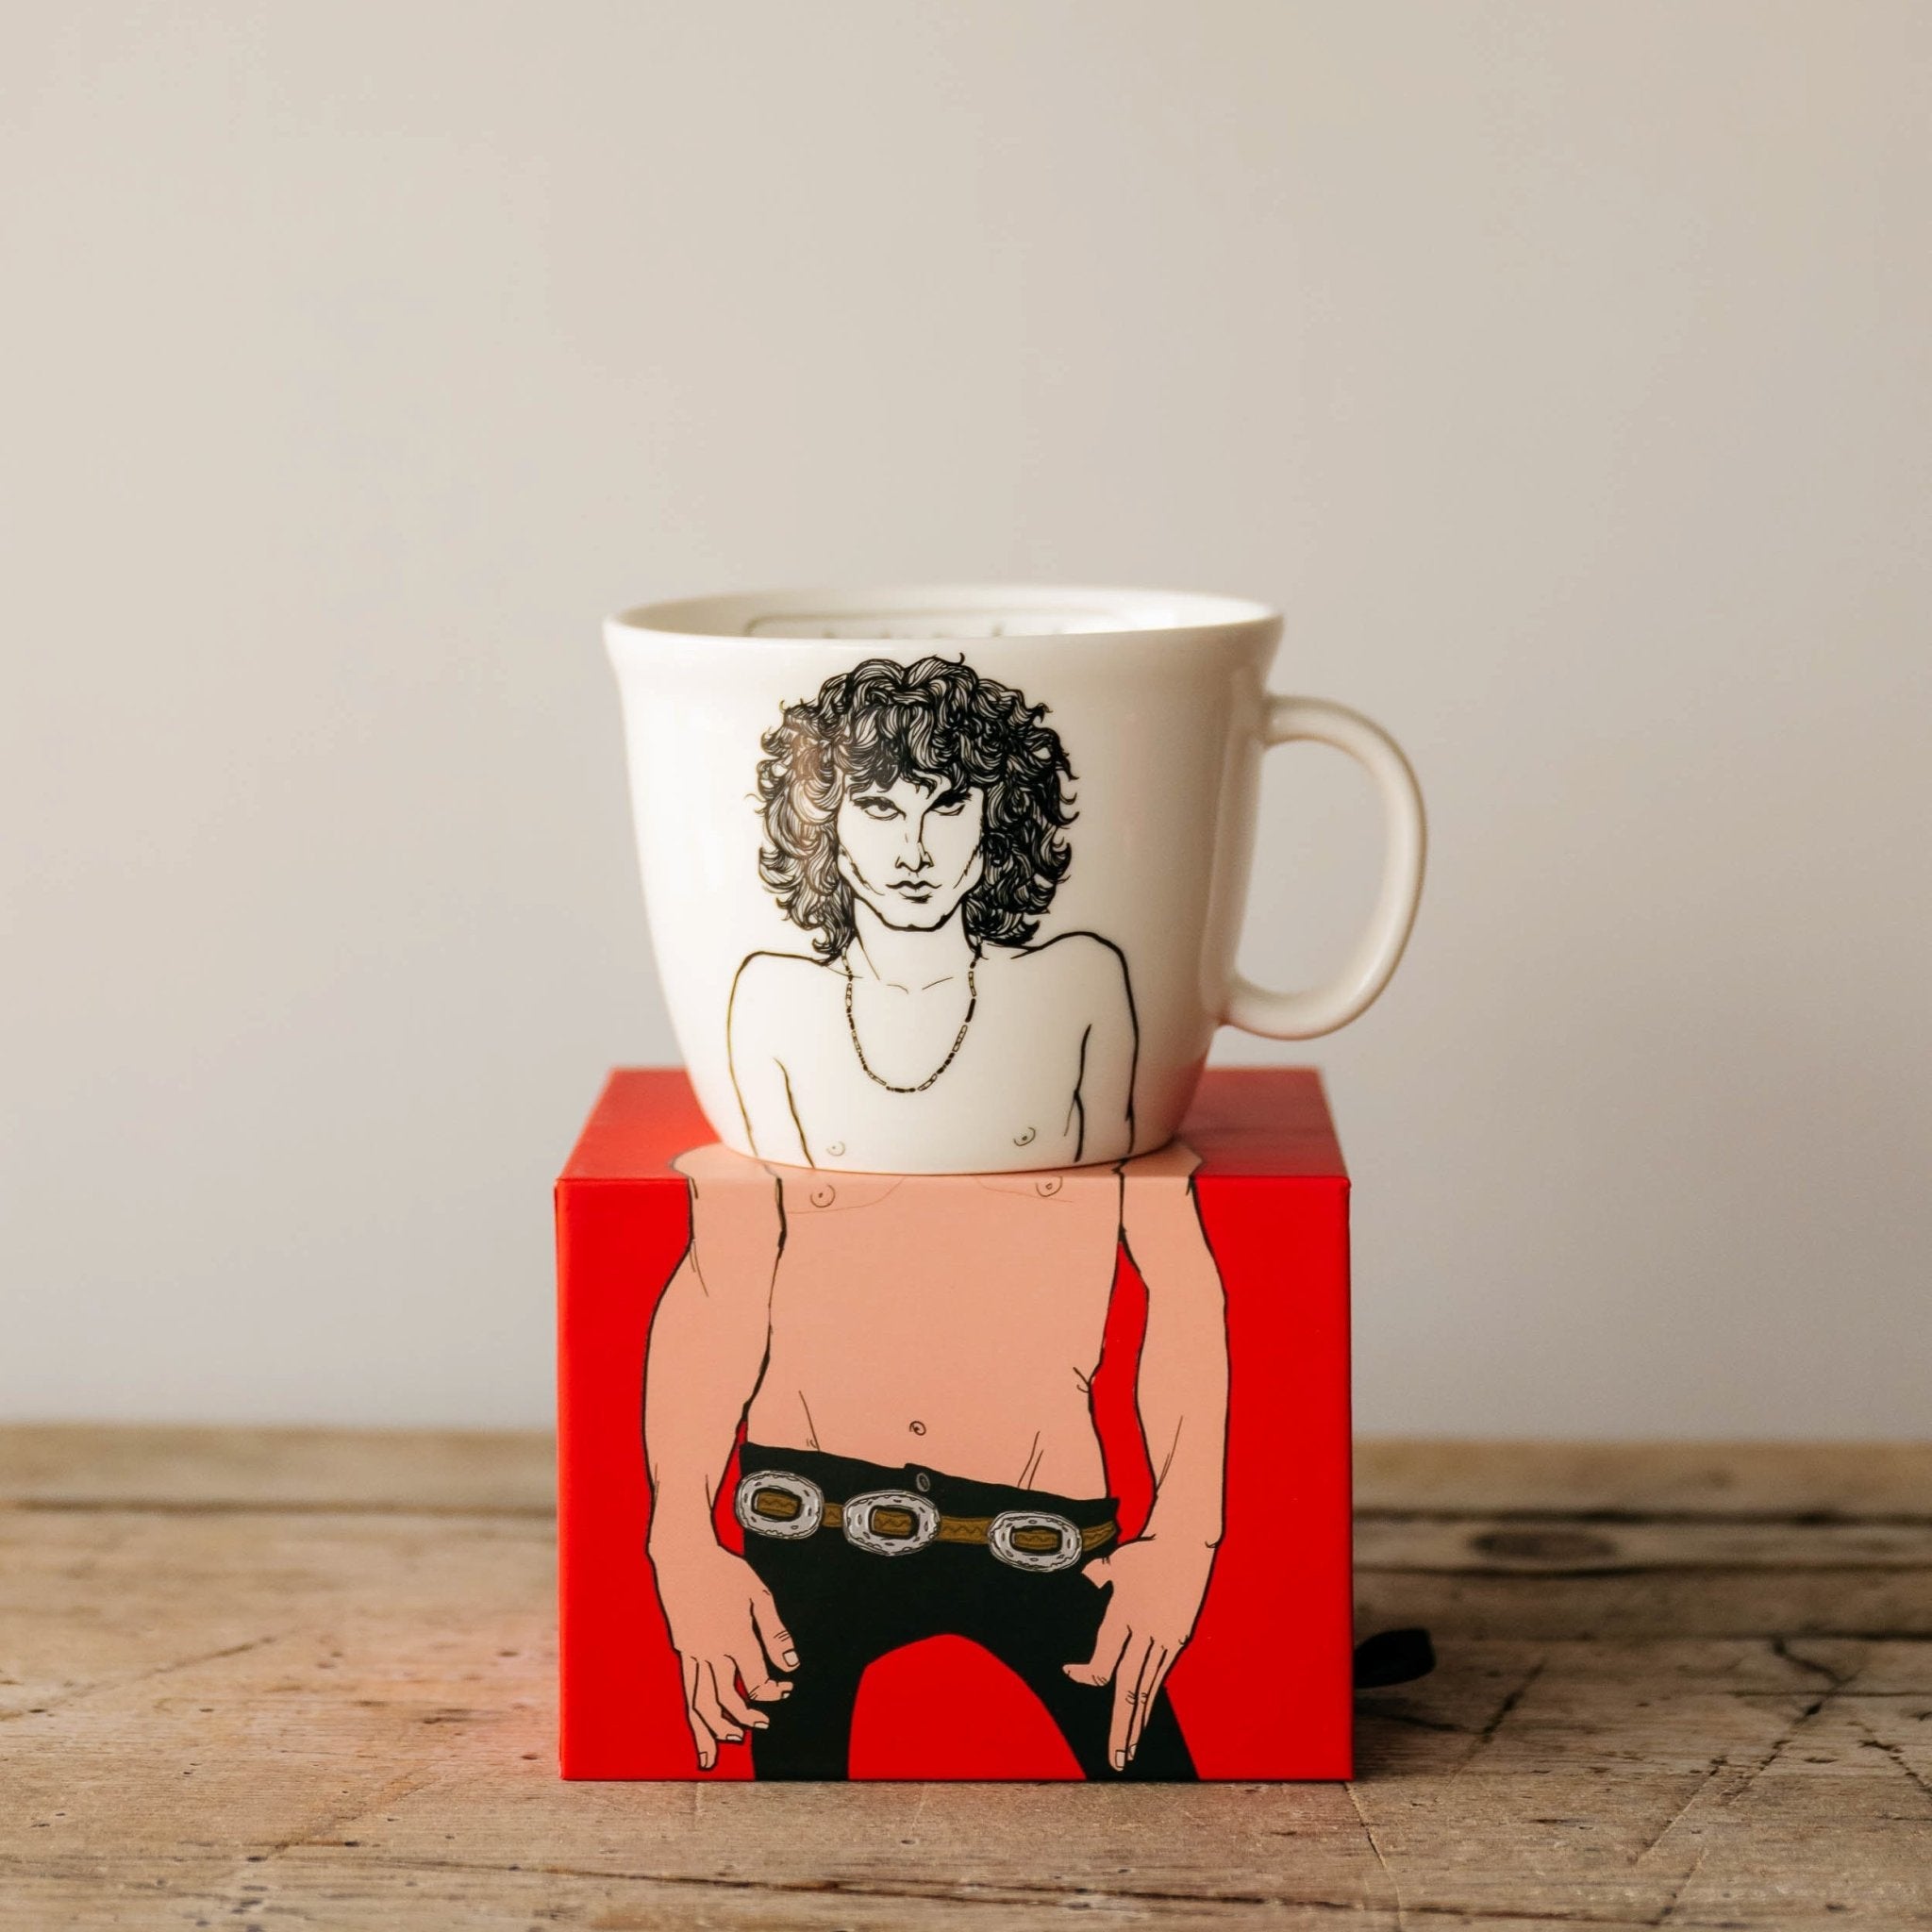 Porcelain cup inspired by Jim Morrison on the box